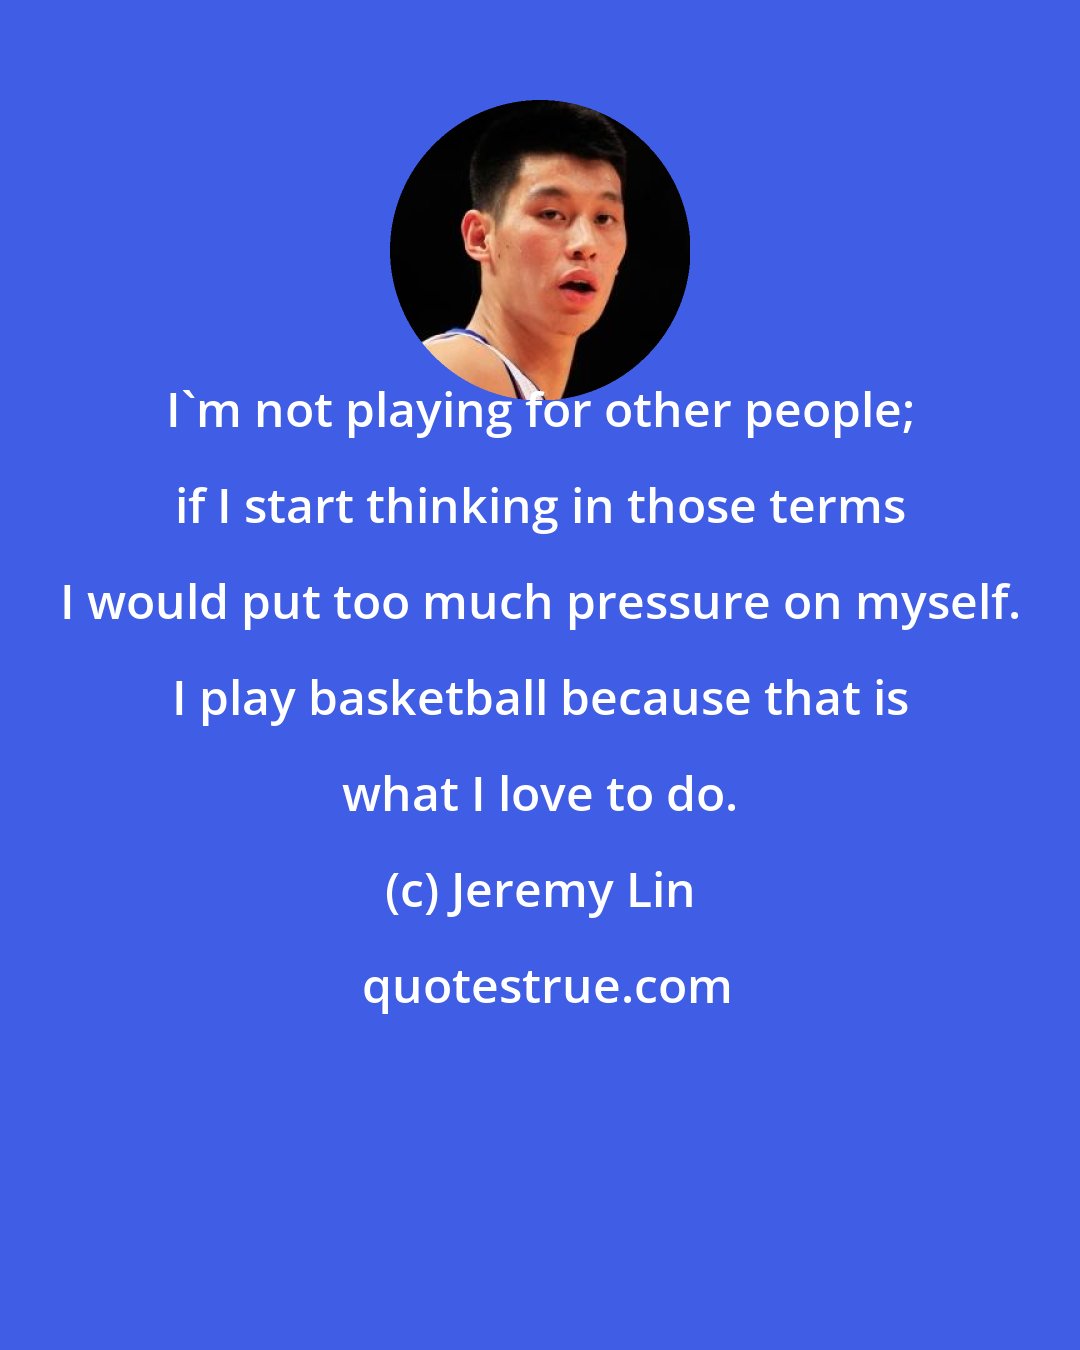 Jeremy Lin: I'm not playing for other people; if I start thinking in those terms I would put too much pressure on myself. I play basketball because that is what I love to do.